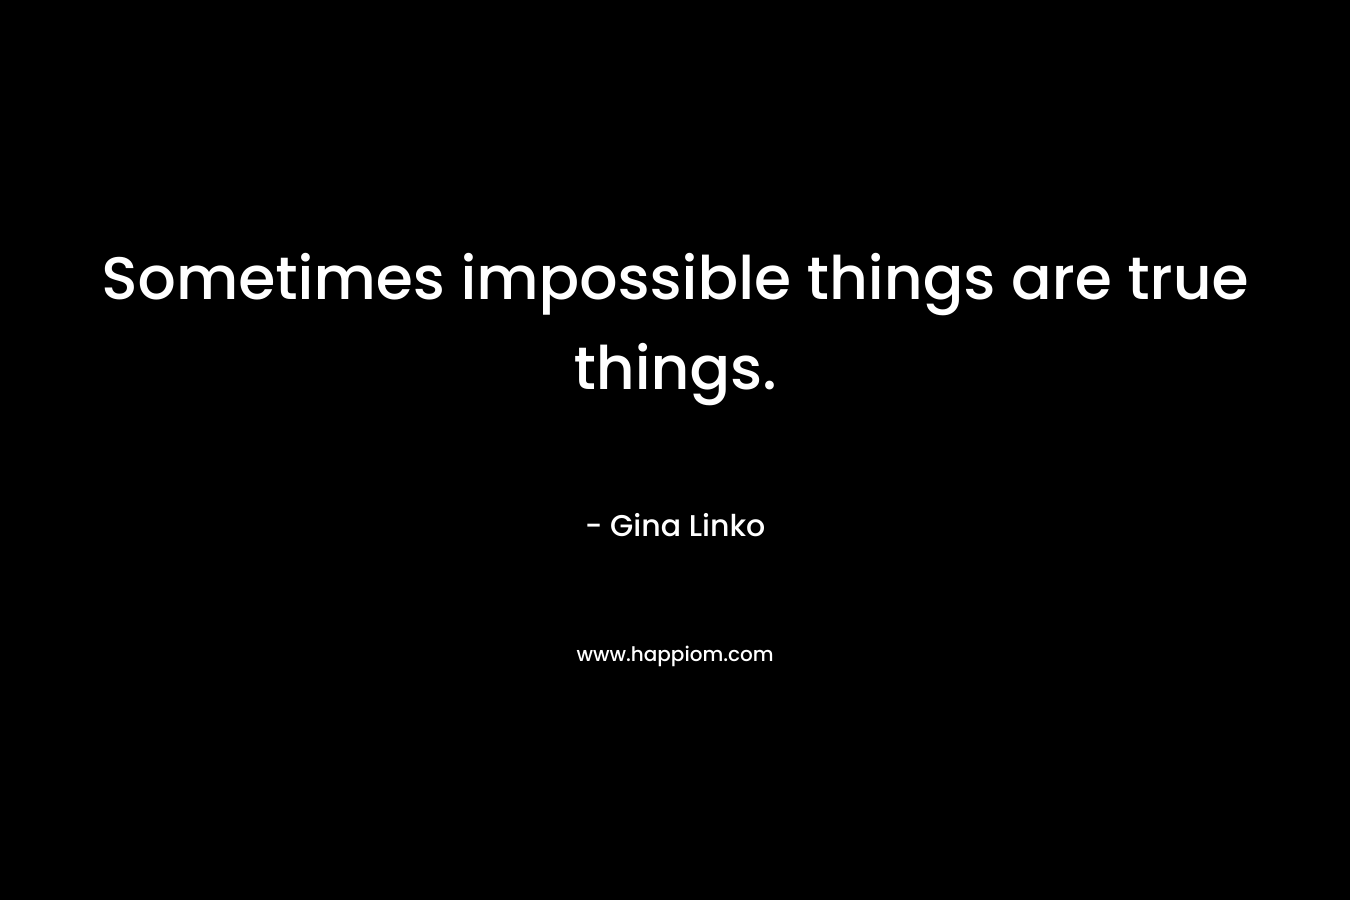 Sometimes impossible things are true things. – Gina Linko